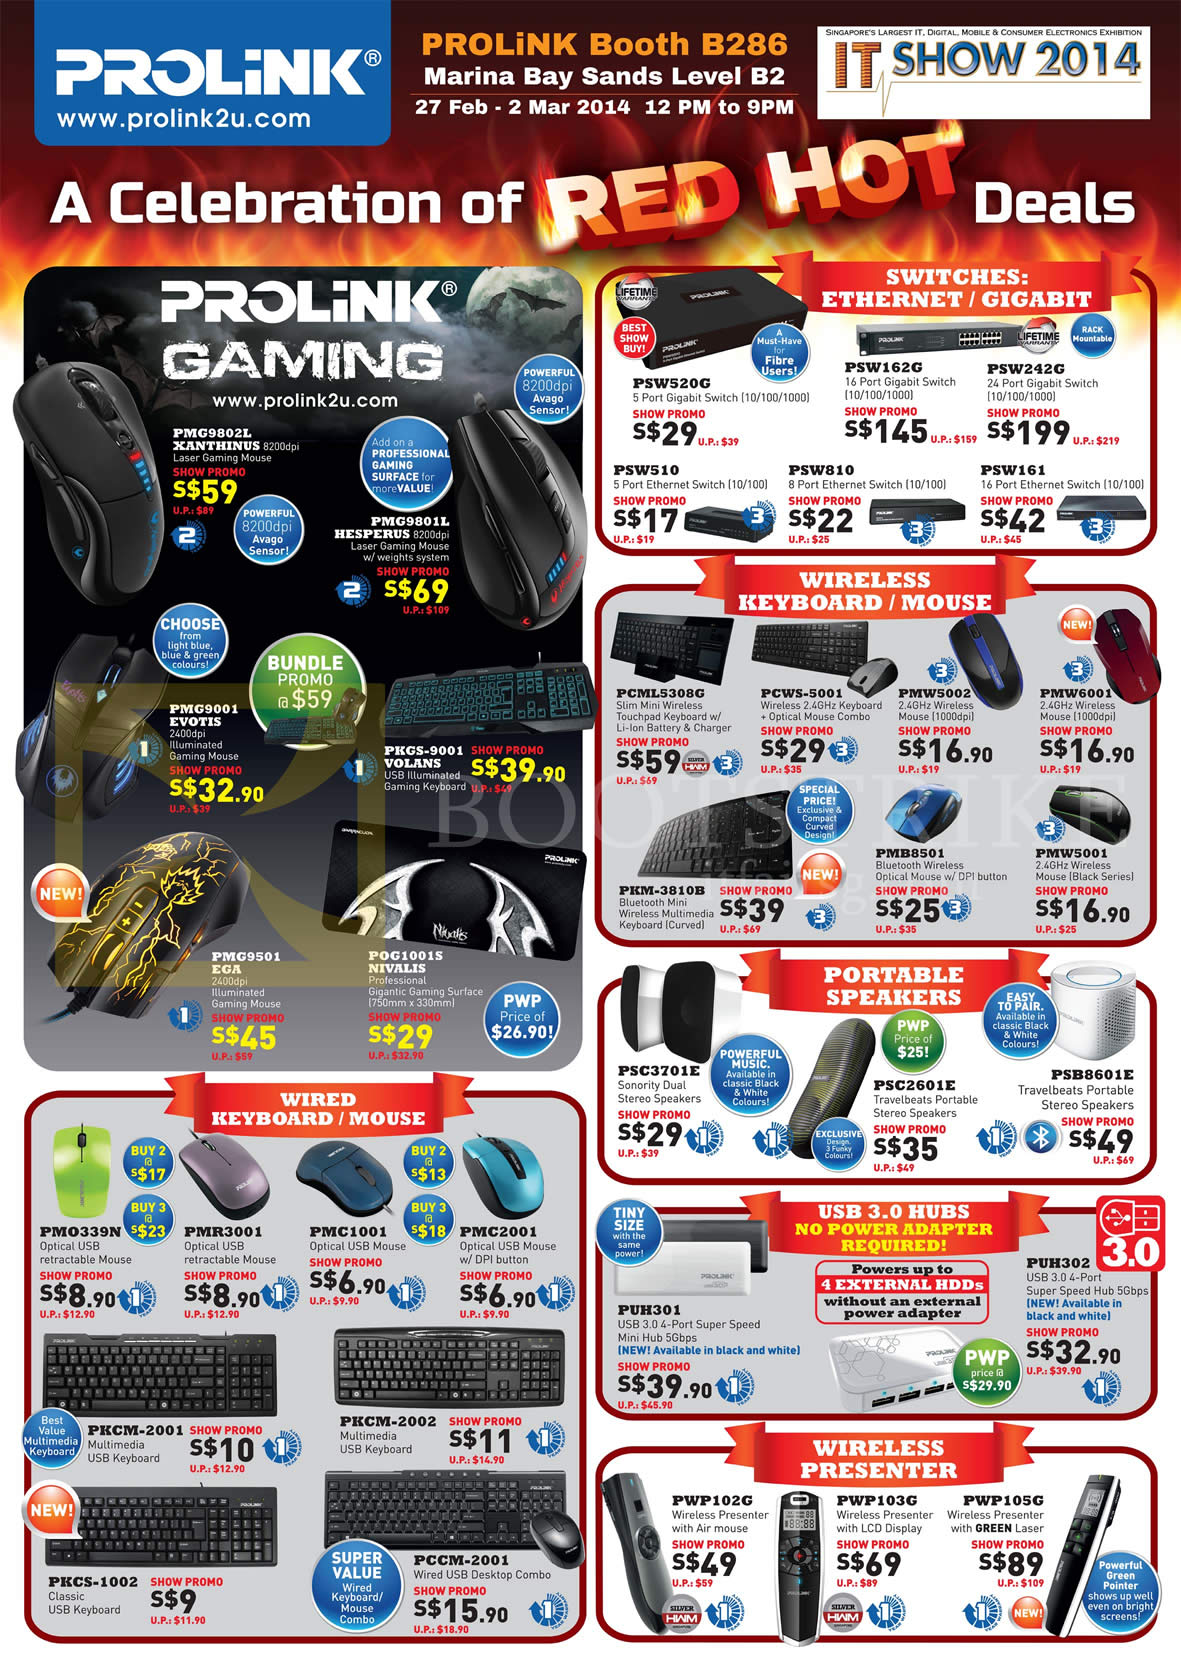 IT SHOW 2014 price list image brochure of Prolink Cybermind Switches Ethernet, Gigabit, Wireless Keyboard, Mouse, Portable Speakers, USB 3.0 Hubs, Wireless Presenter, Mouse